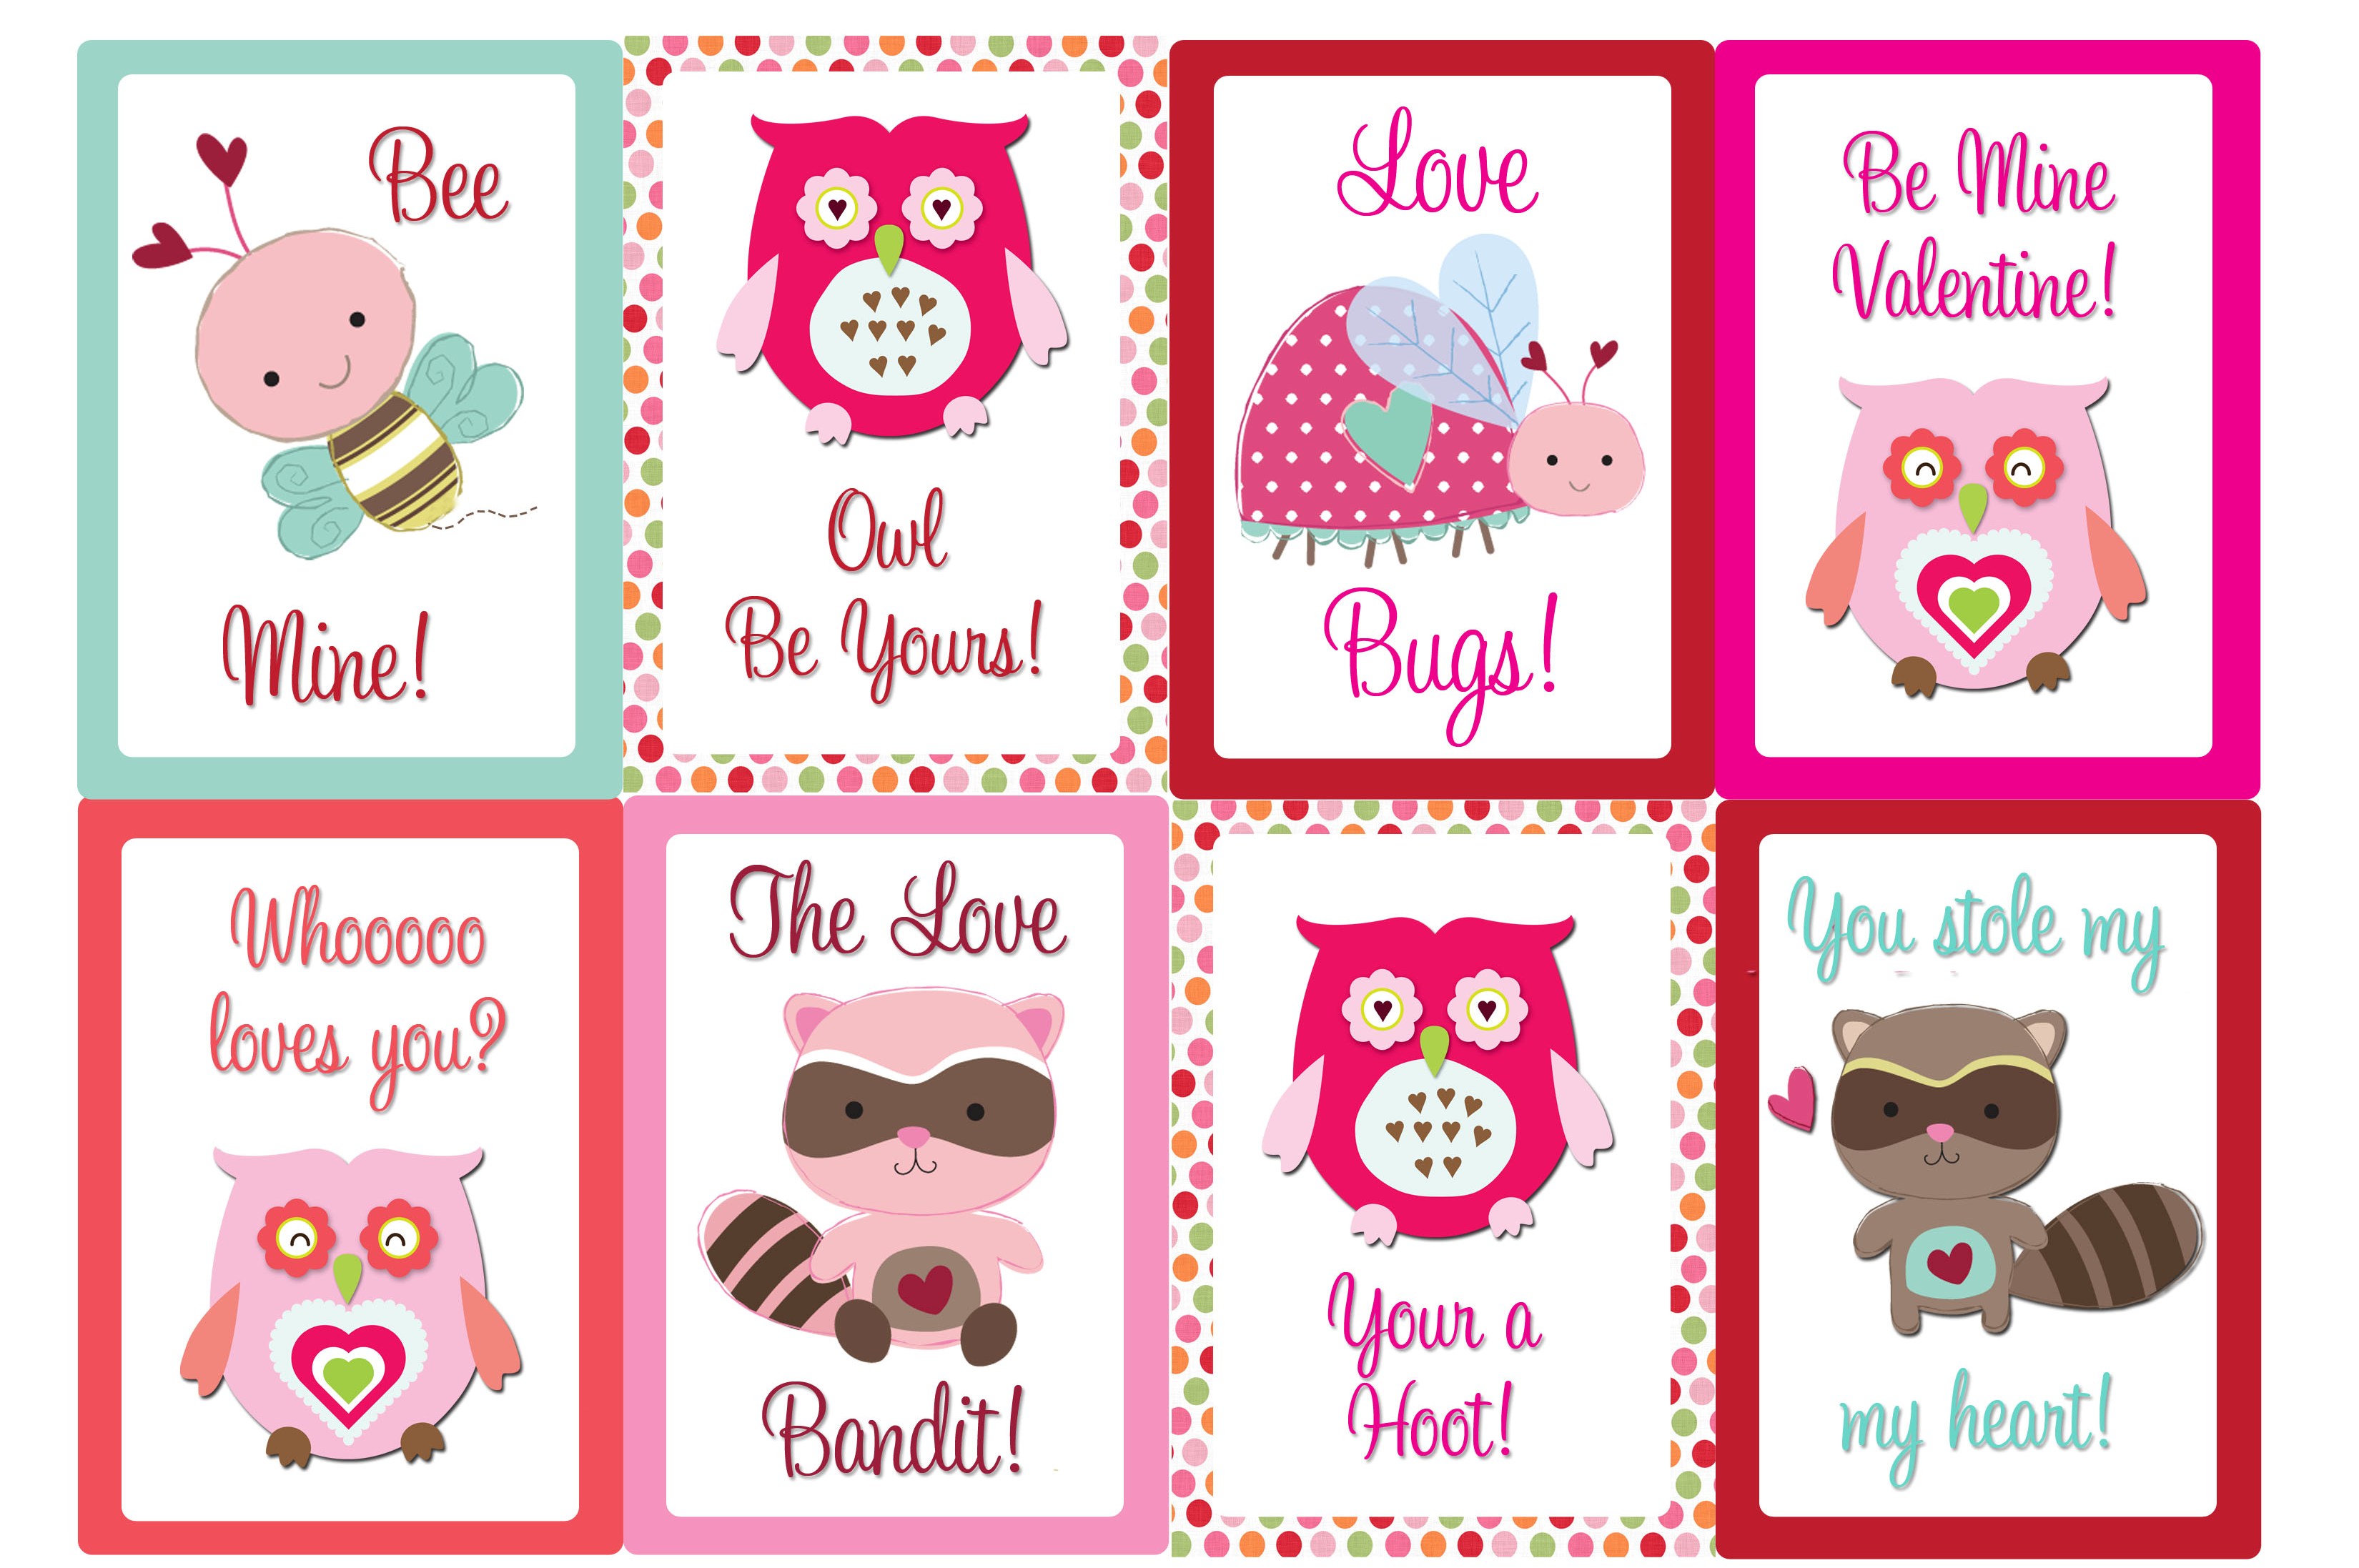 9 Best Images of Printable Valentine #39 s Day Greeting Cards Valentine #39 s